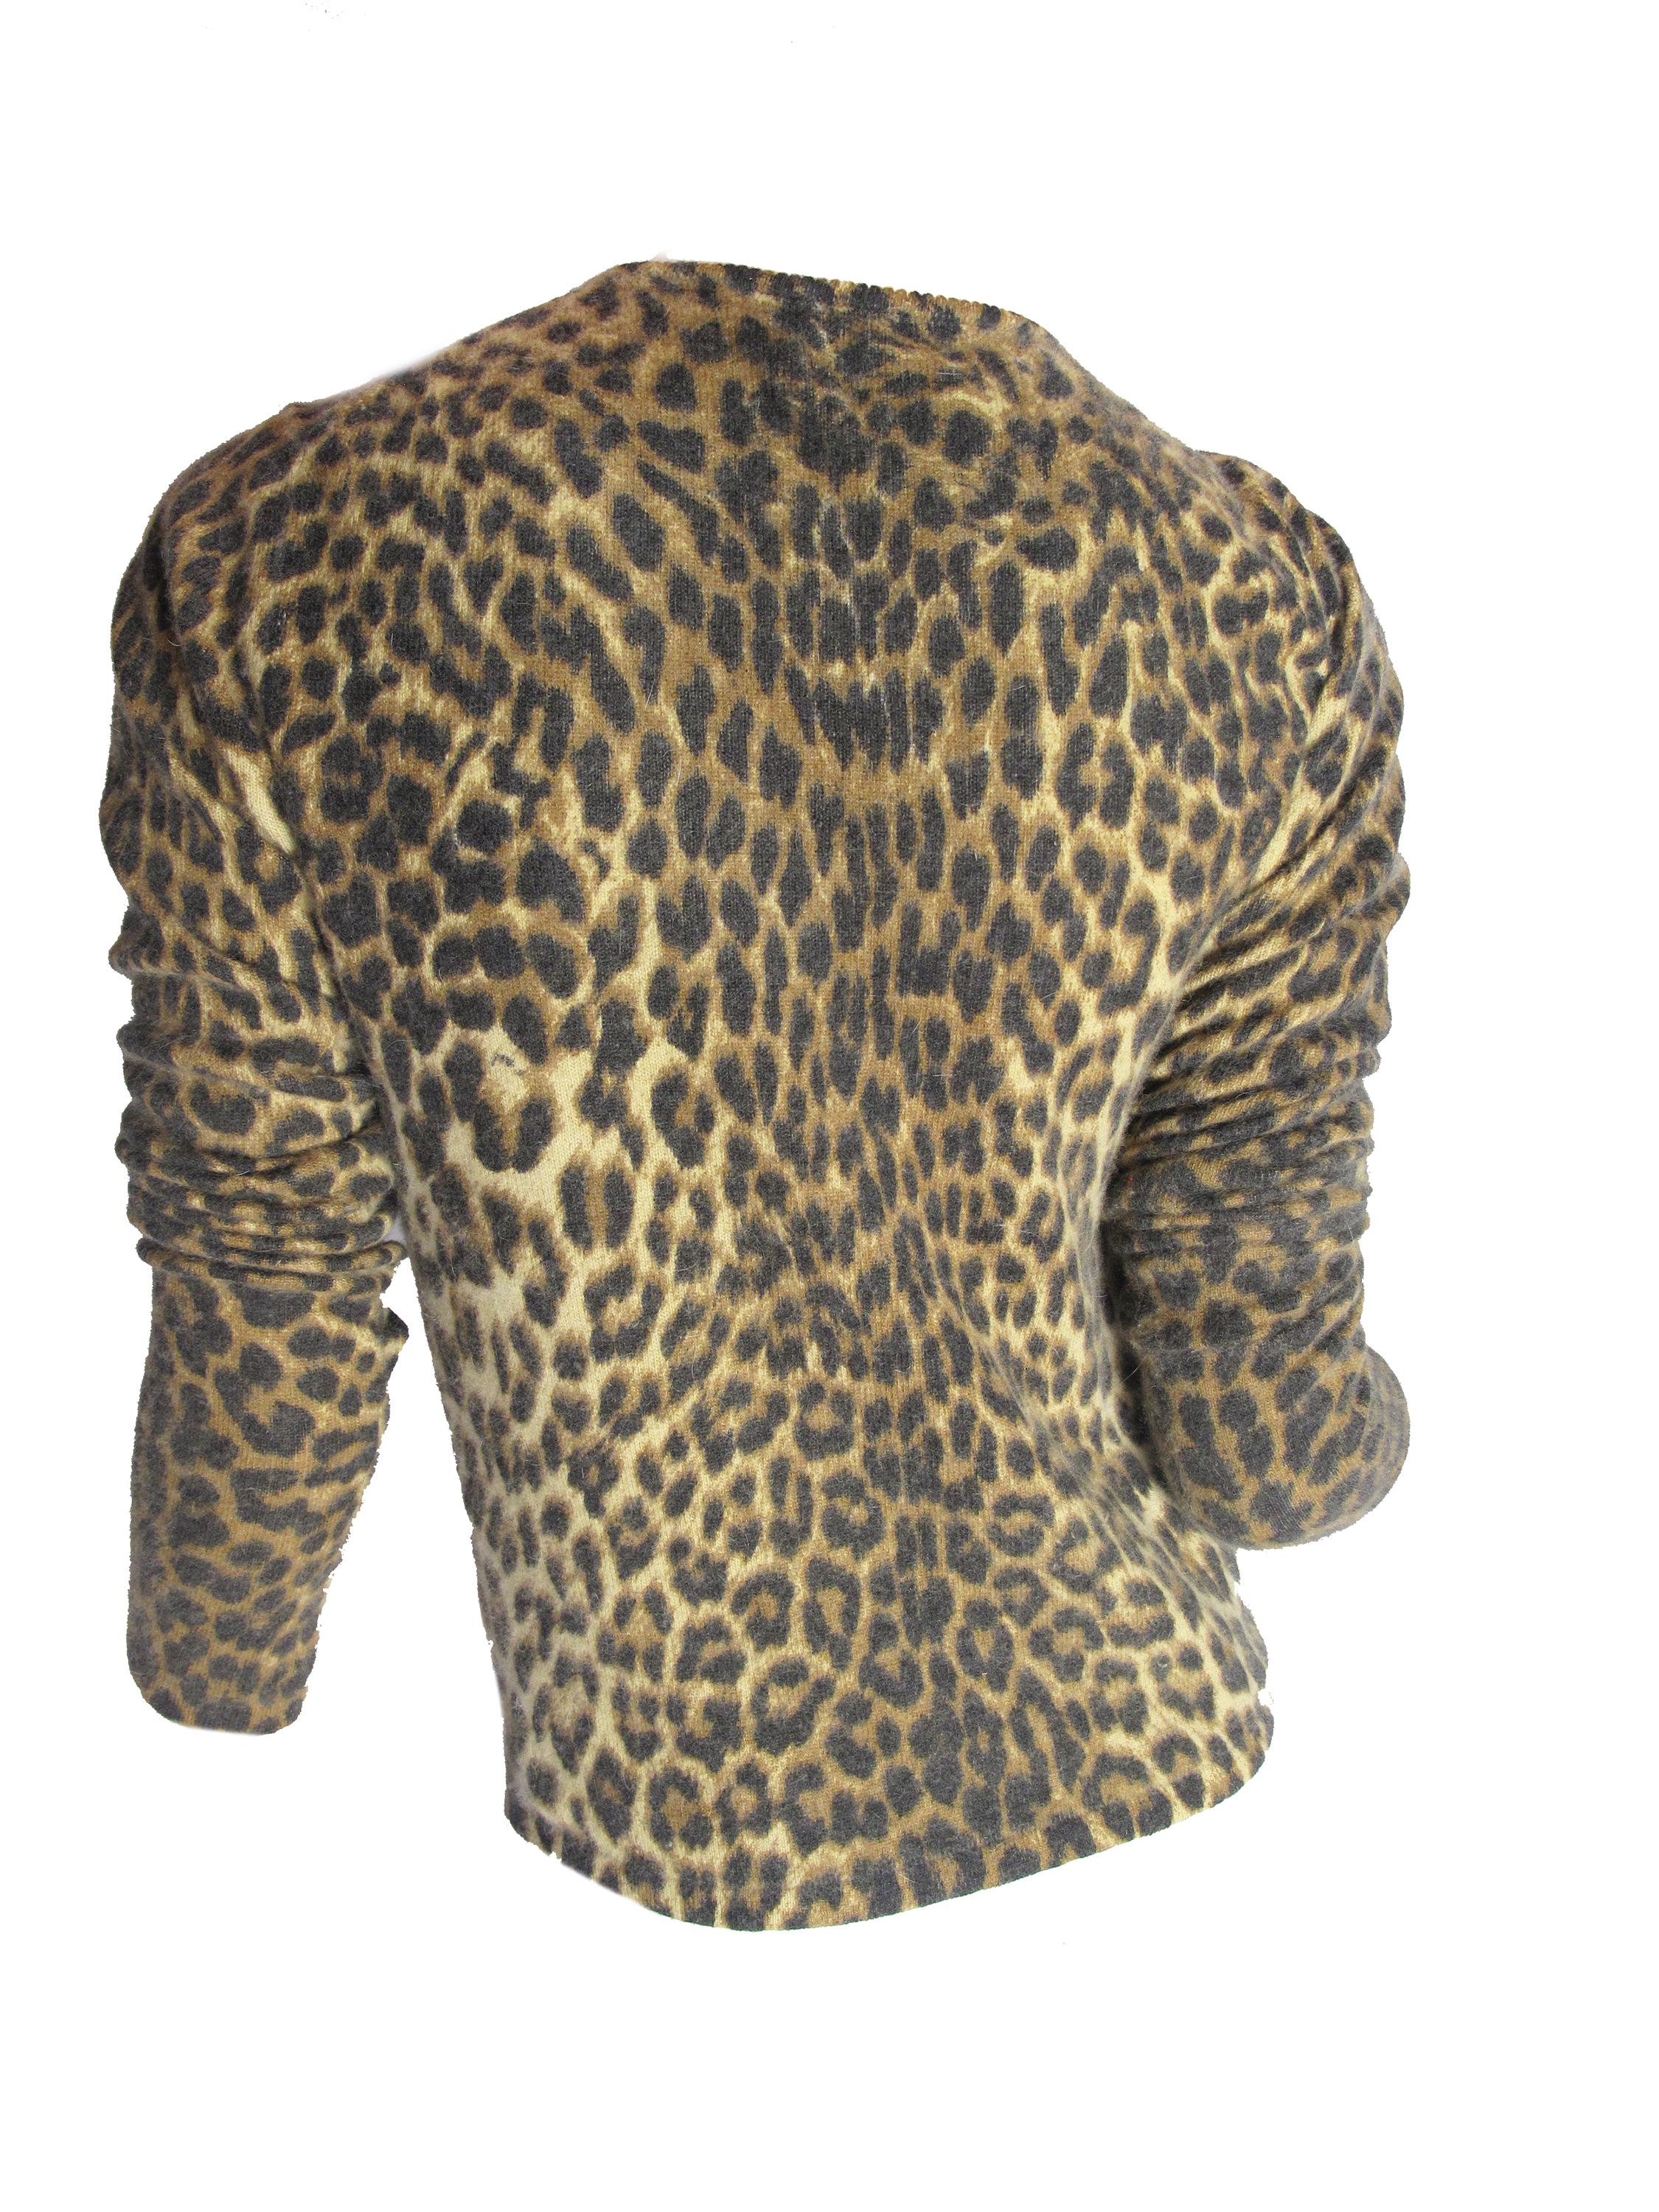 John Galliano brown and black lightweight leopard printed angora and wool cardigan. Button closures in front. Condition: Very good, tag semi detached.  36